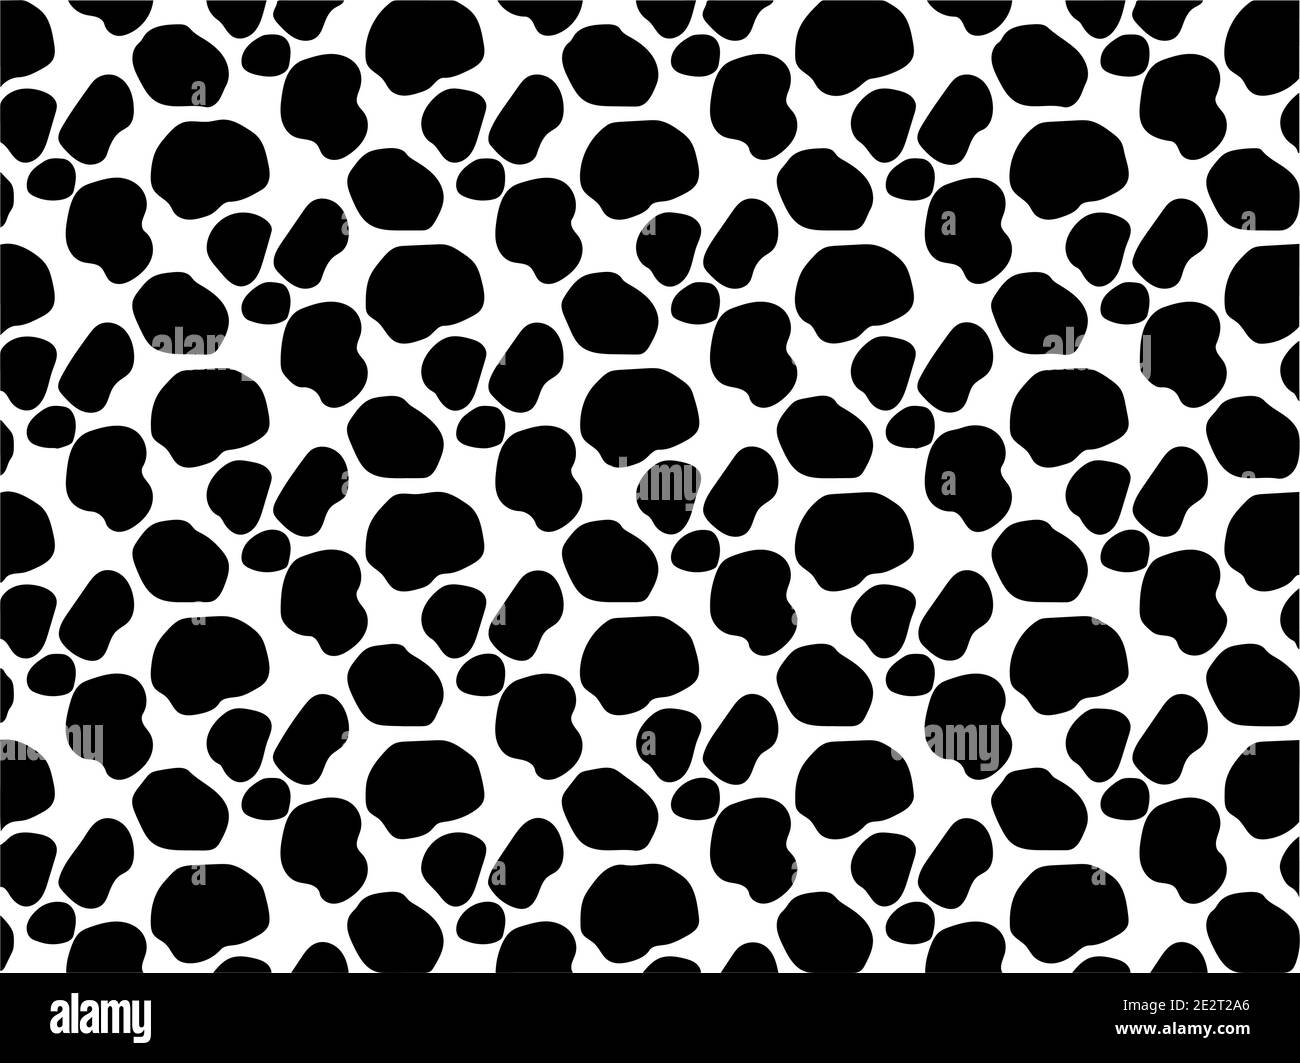 Black spot repeating pattern background cow pattern on white background, vector graphic Stock Vector